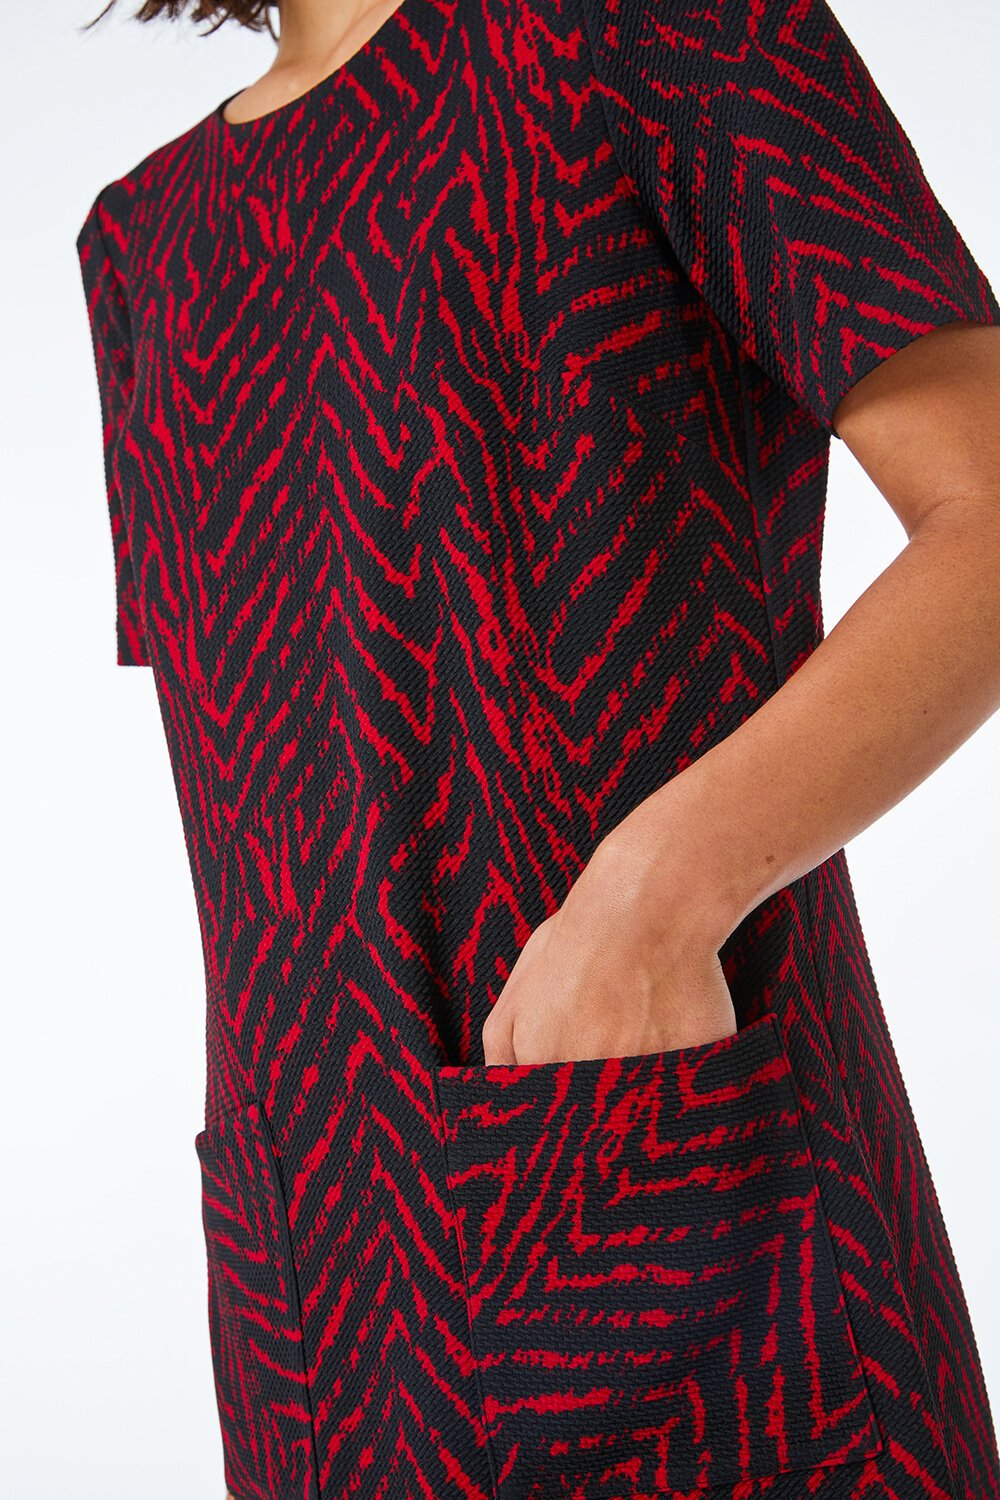 Red Textured Animal Print Stretch Tunic Dress, Image 5 of 5